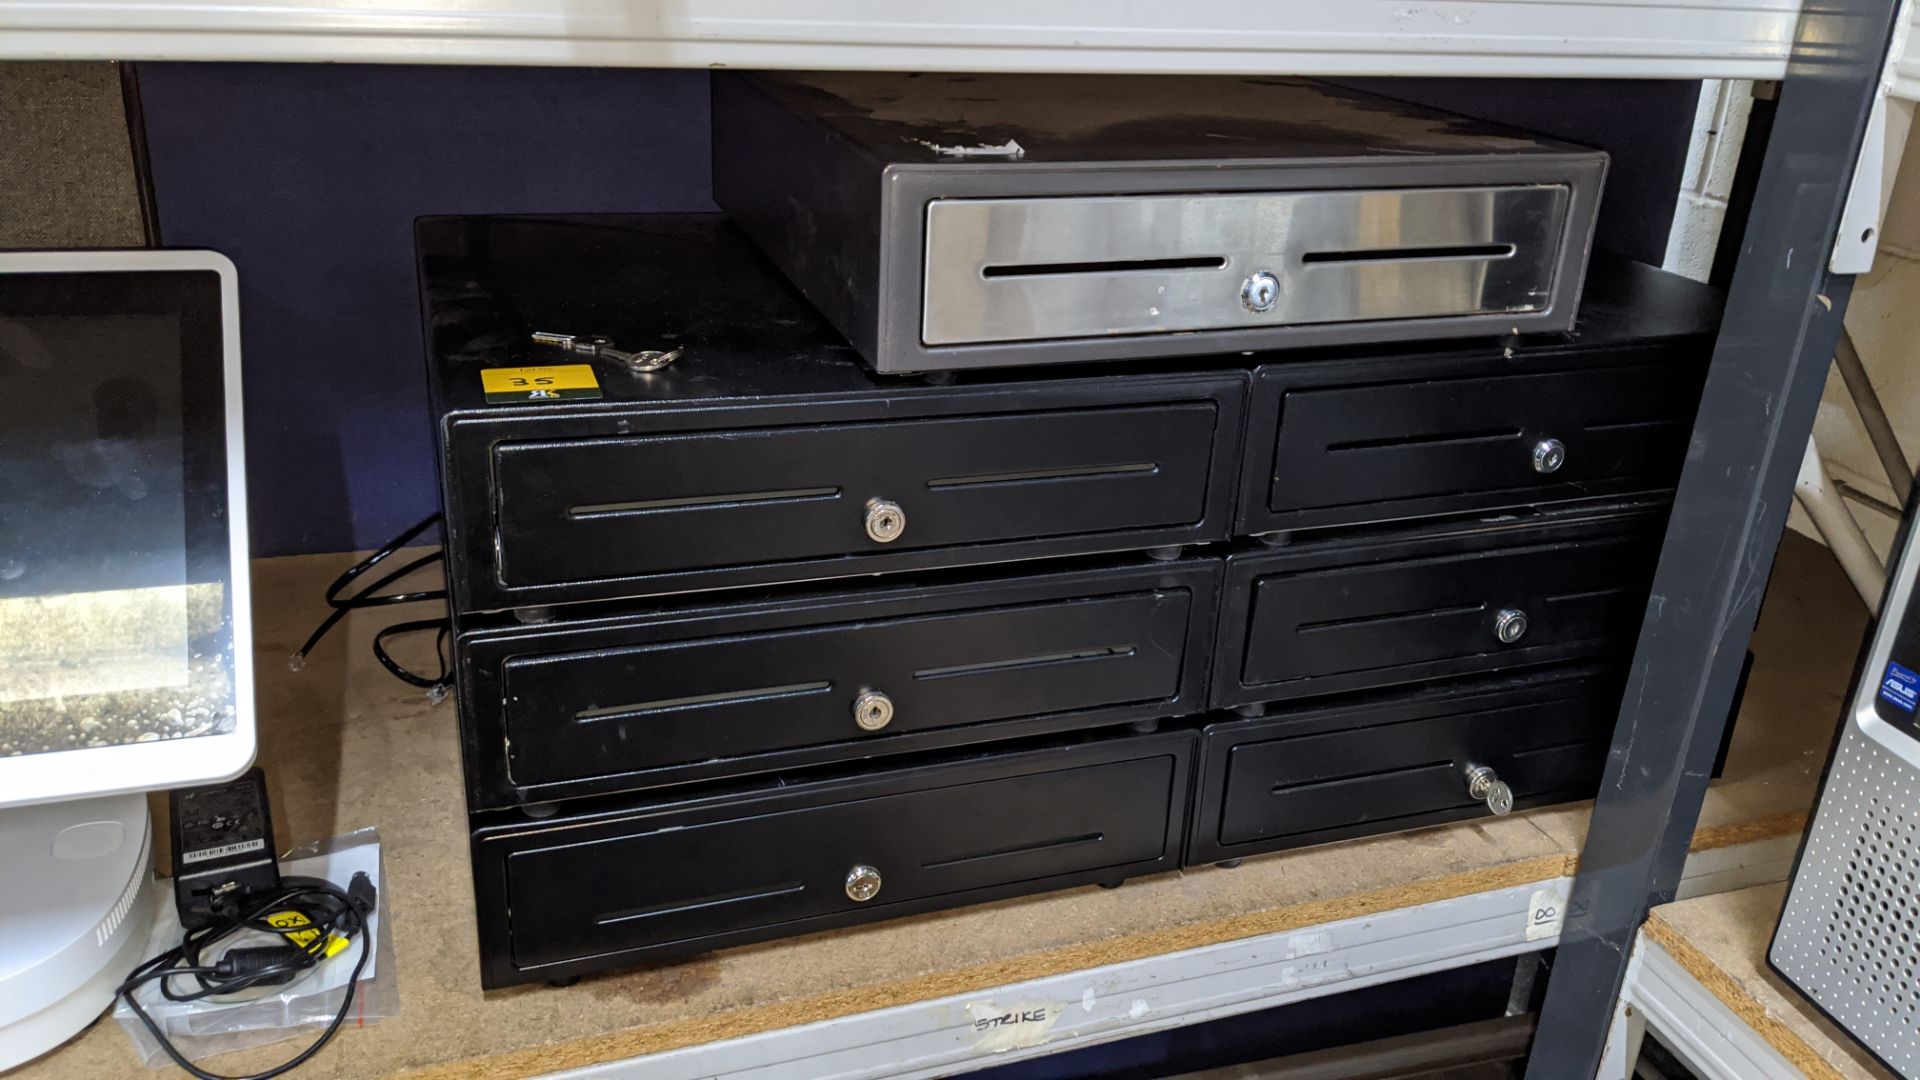 7 assorted cash drawers Lots 35 - 49 consist of the residual assets from an EPOS retailer/